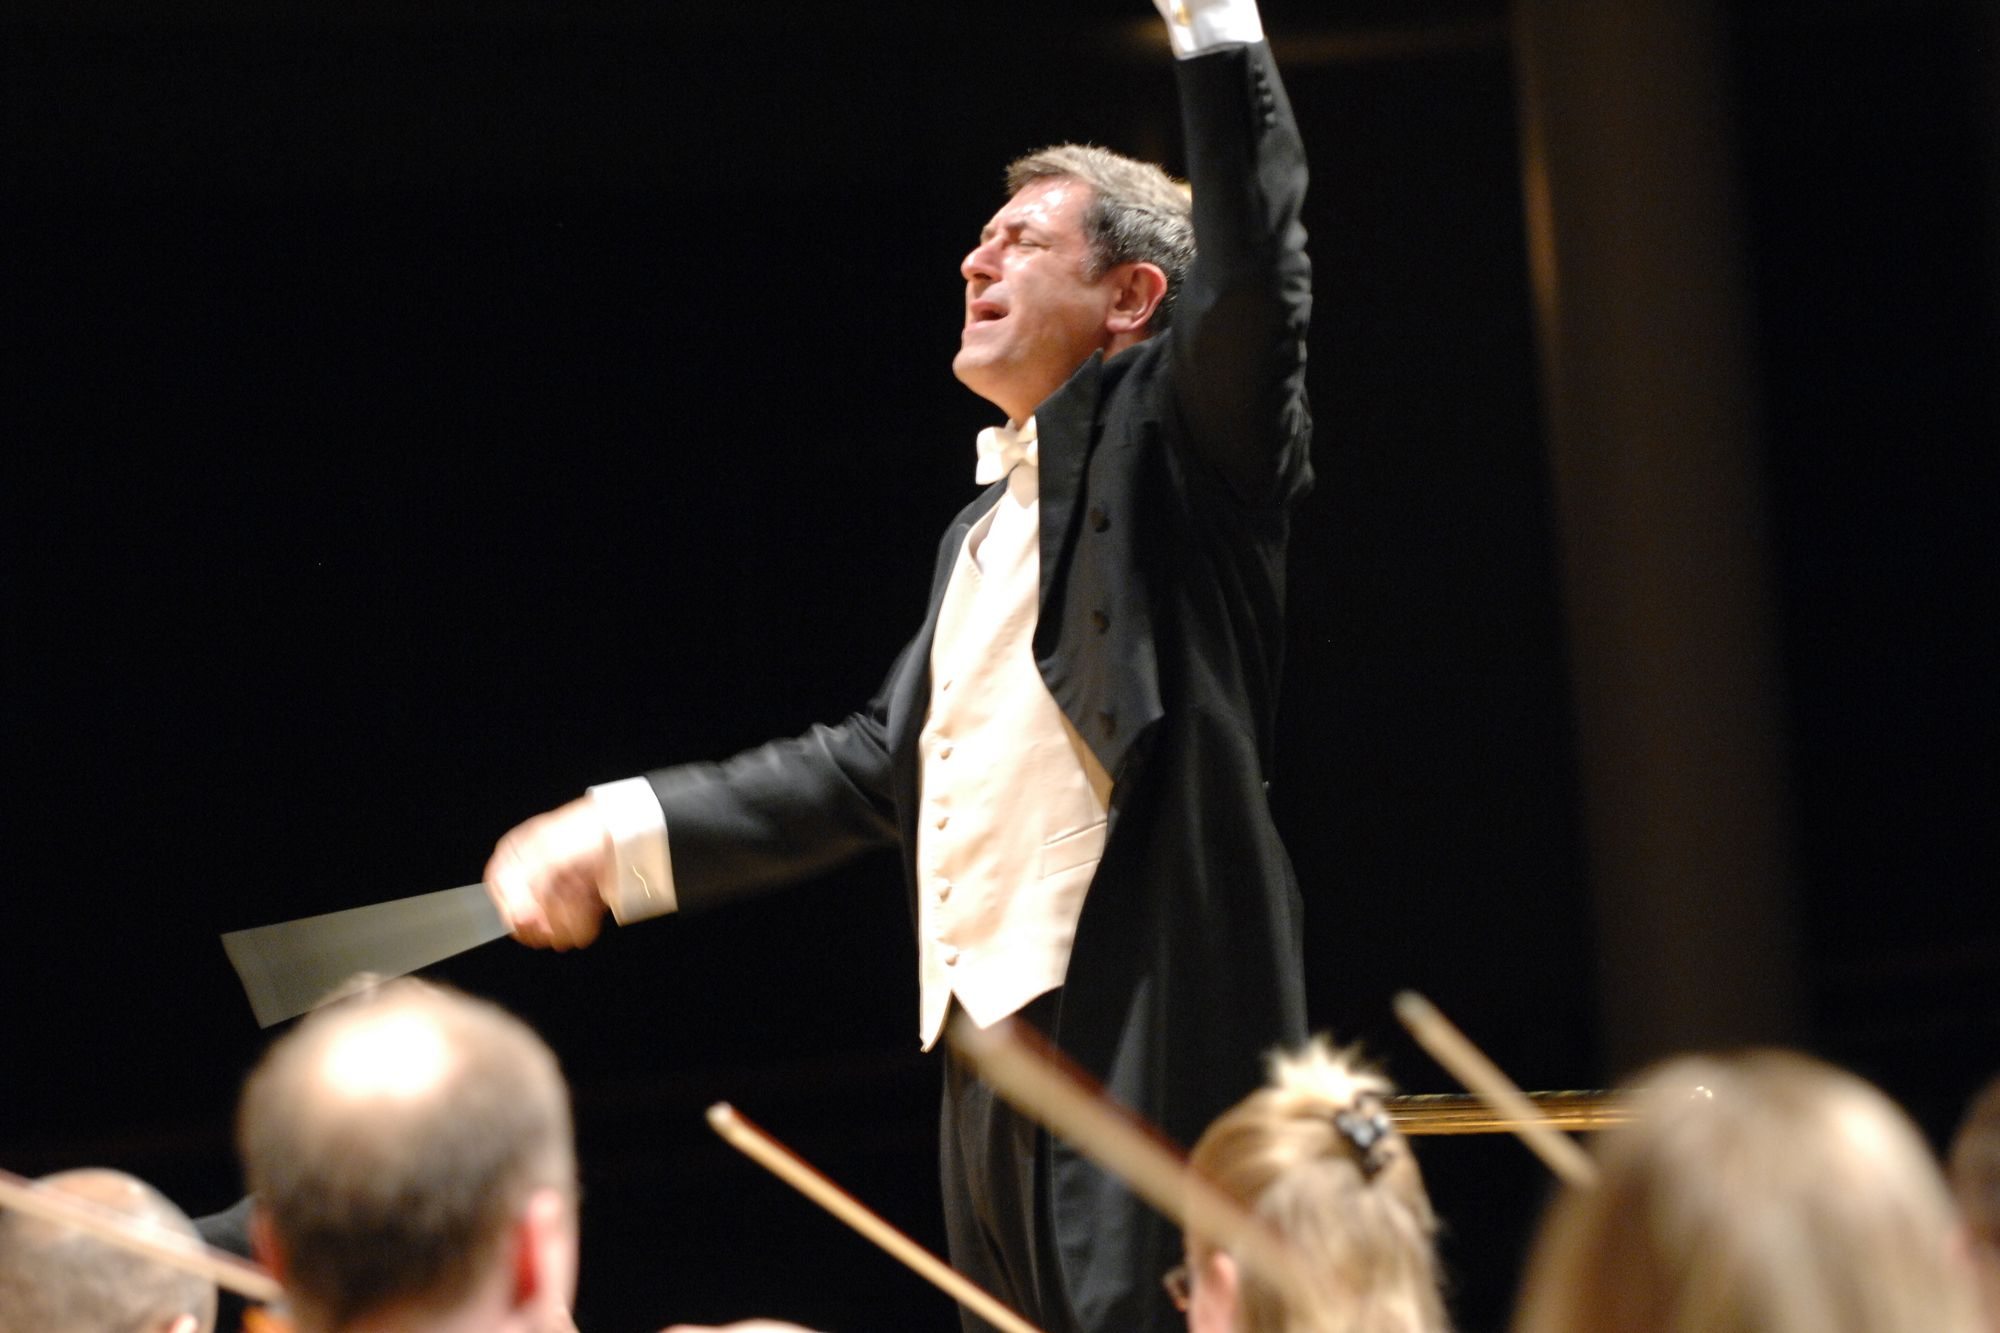 The Vancouver Symphony, led by conductor and music director Salvador Brotons, has raised about $135,000 and will be able to move forward with a 33rd season.